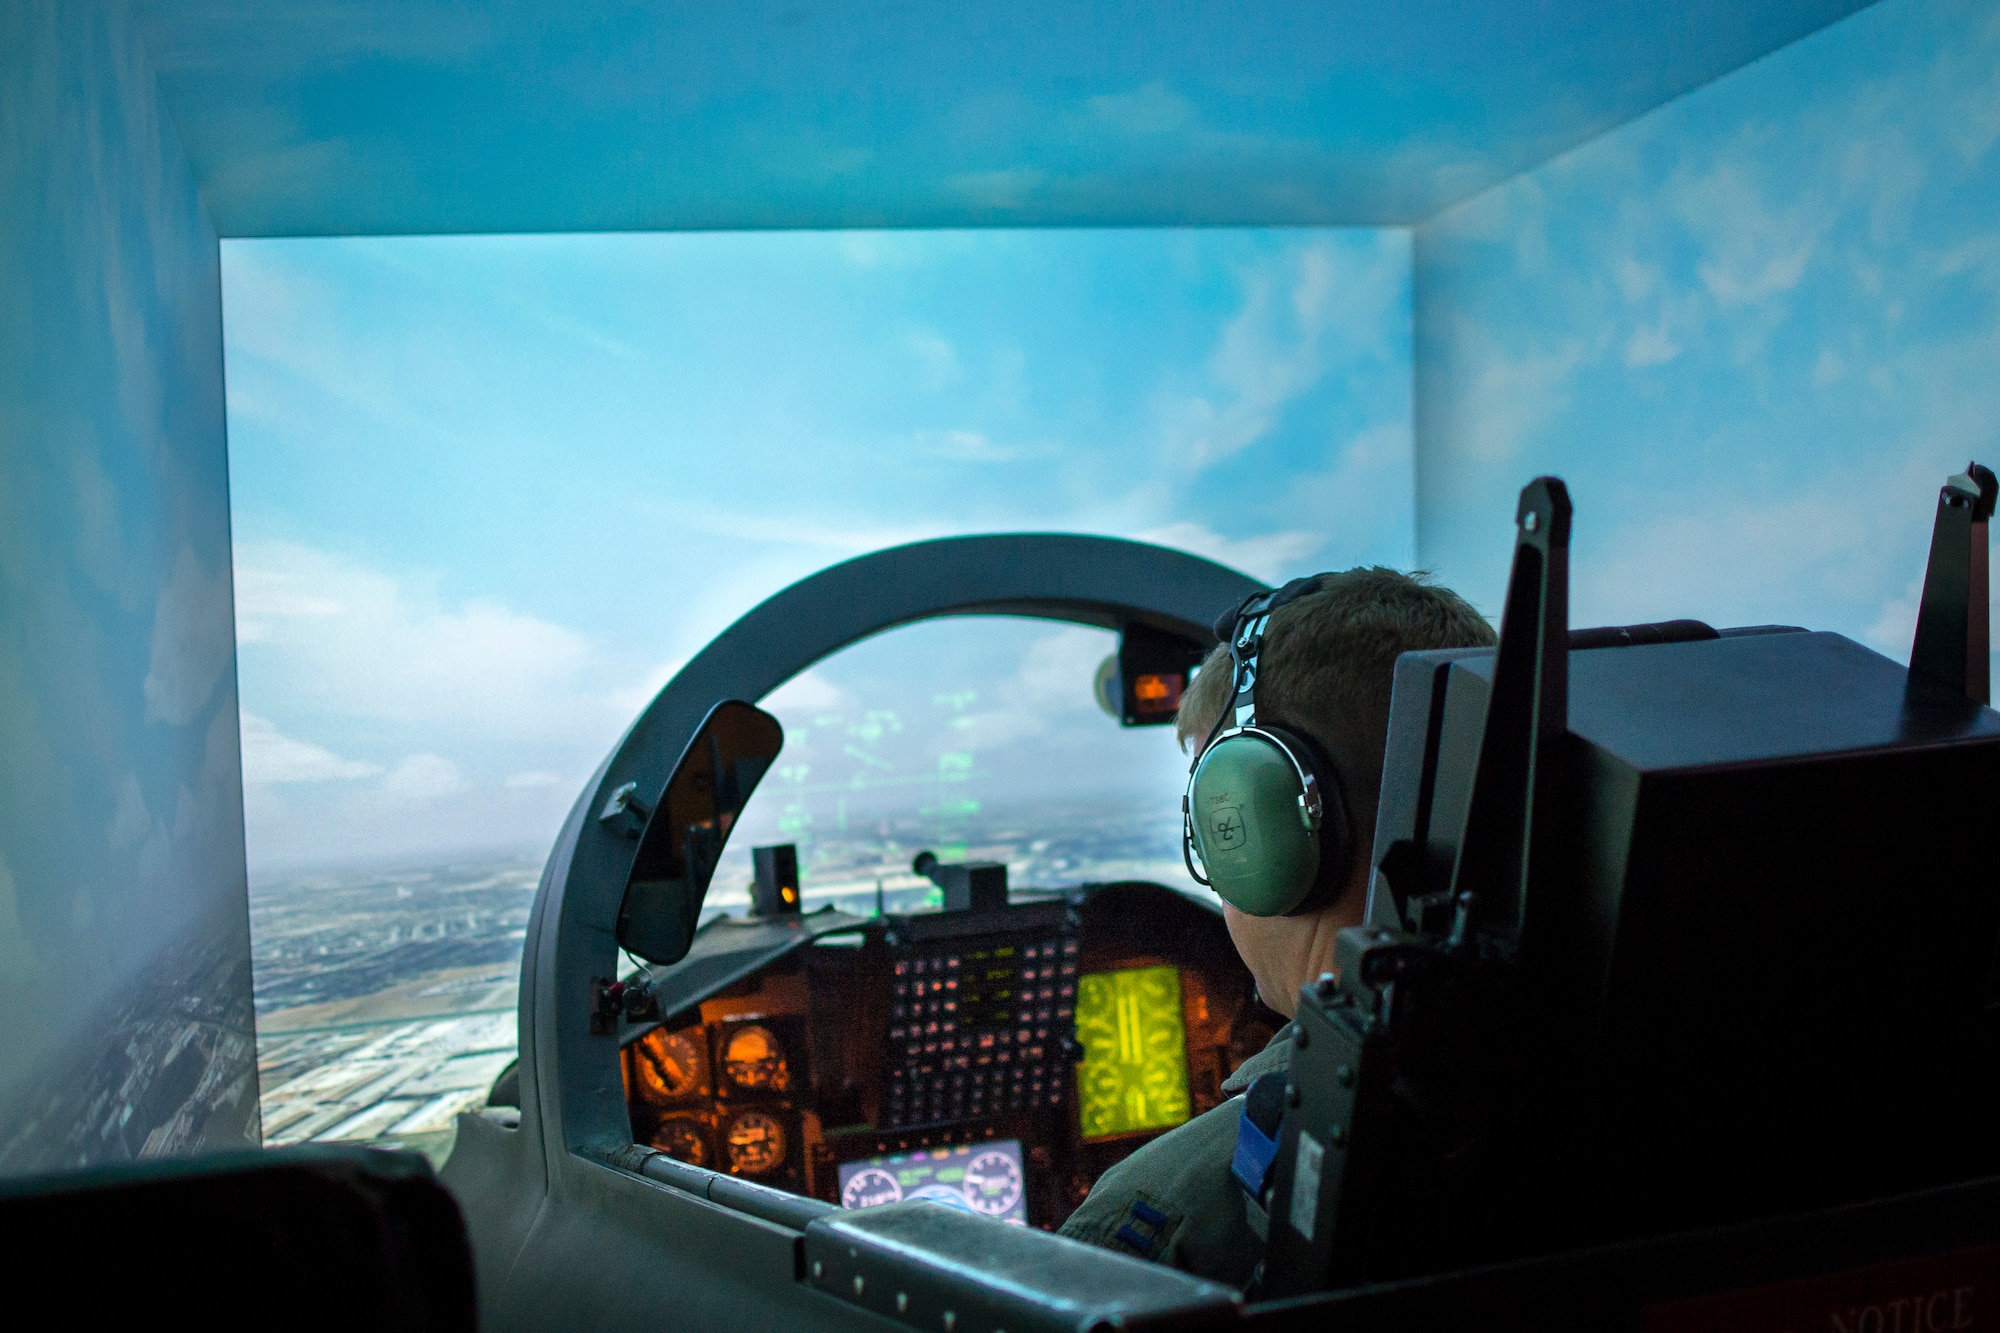 A U.S. Air Force student pilot checks instruments while flying in a T-38C Talon flight simulator on Nov. 8th at Joint Base San Antonio - Randolph. Simulators play a key role in Introduction to Fighter Fundamentals and pilot training.